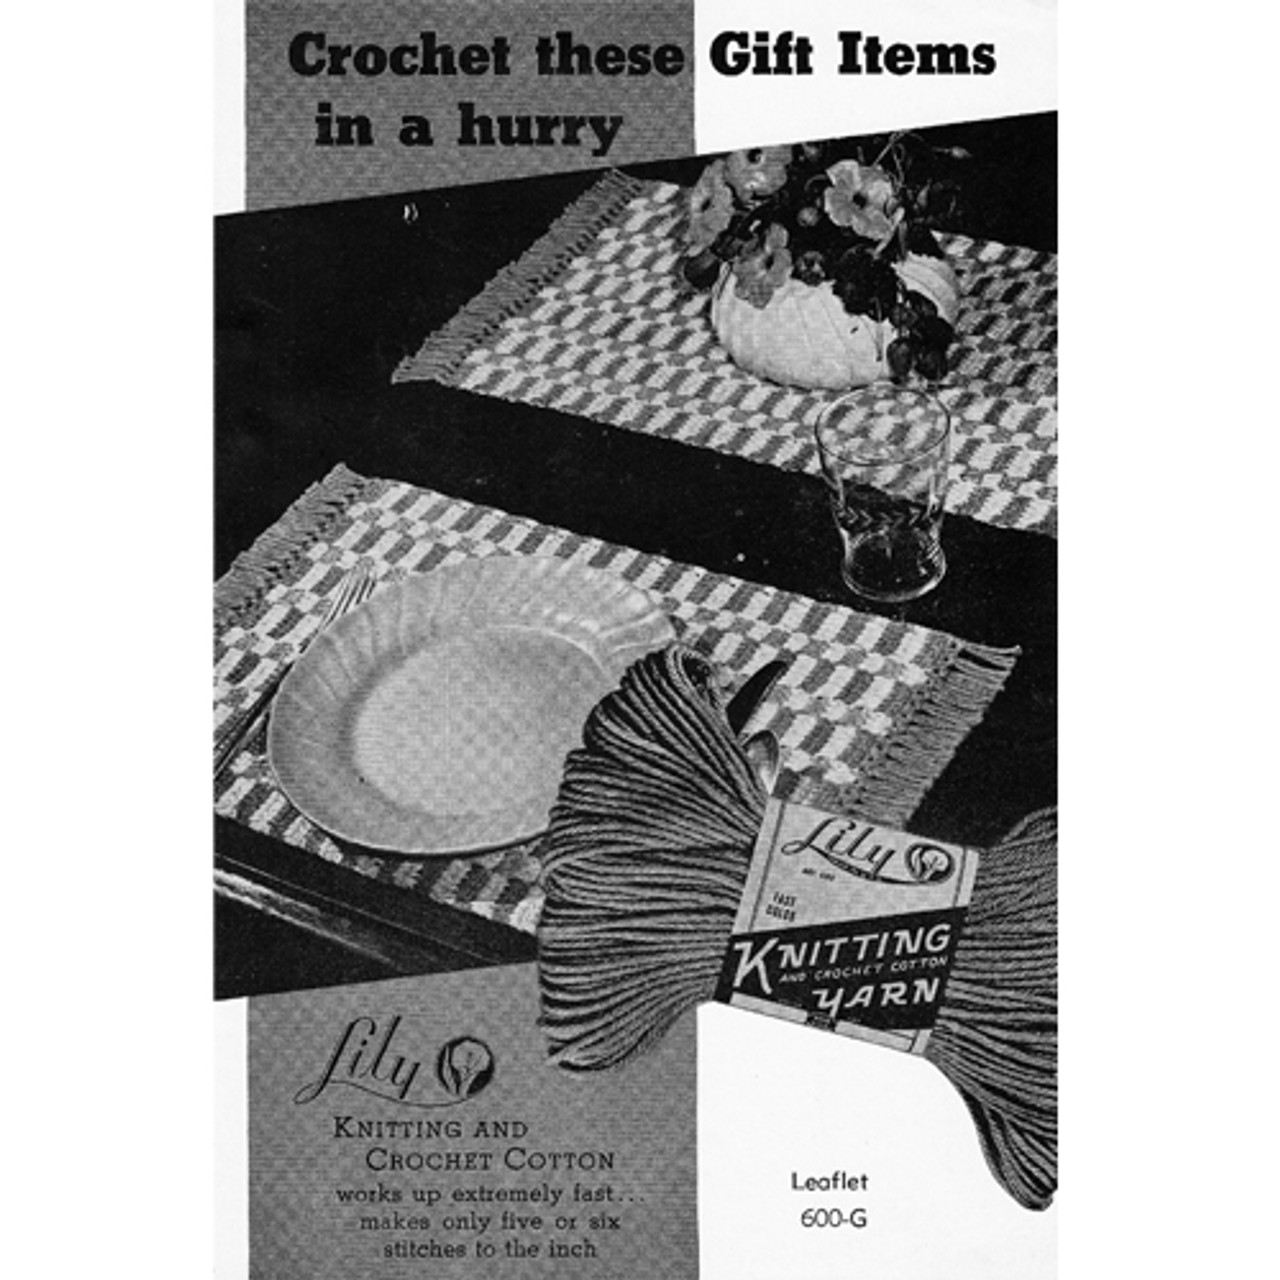 Lilly Leaflet Crochet Mats and Hot Plate Patterns